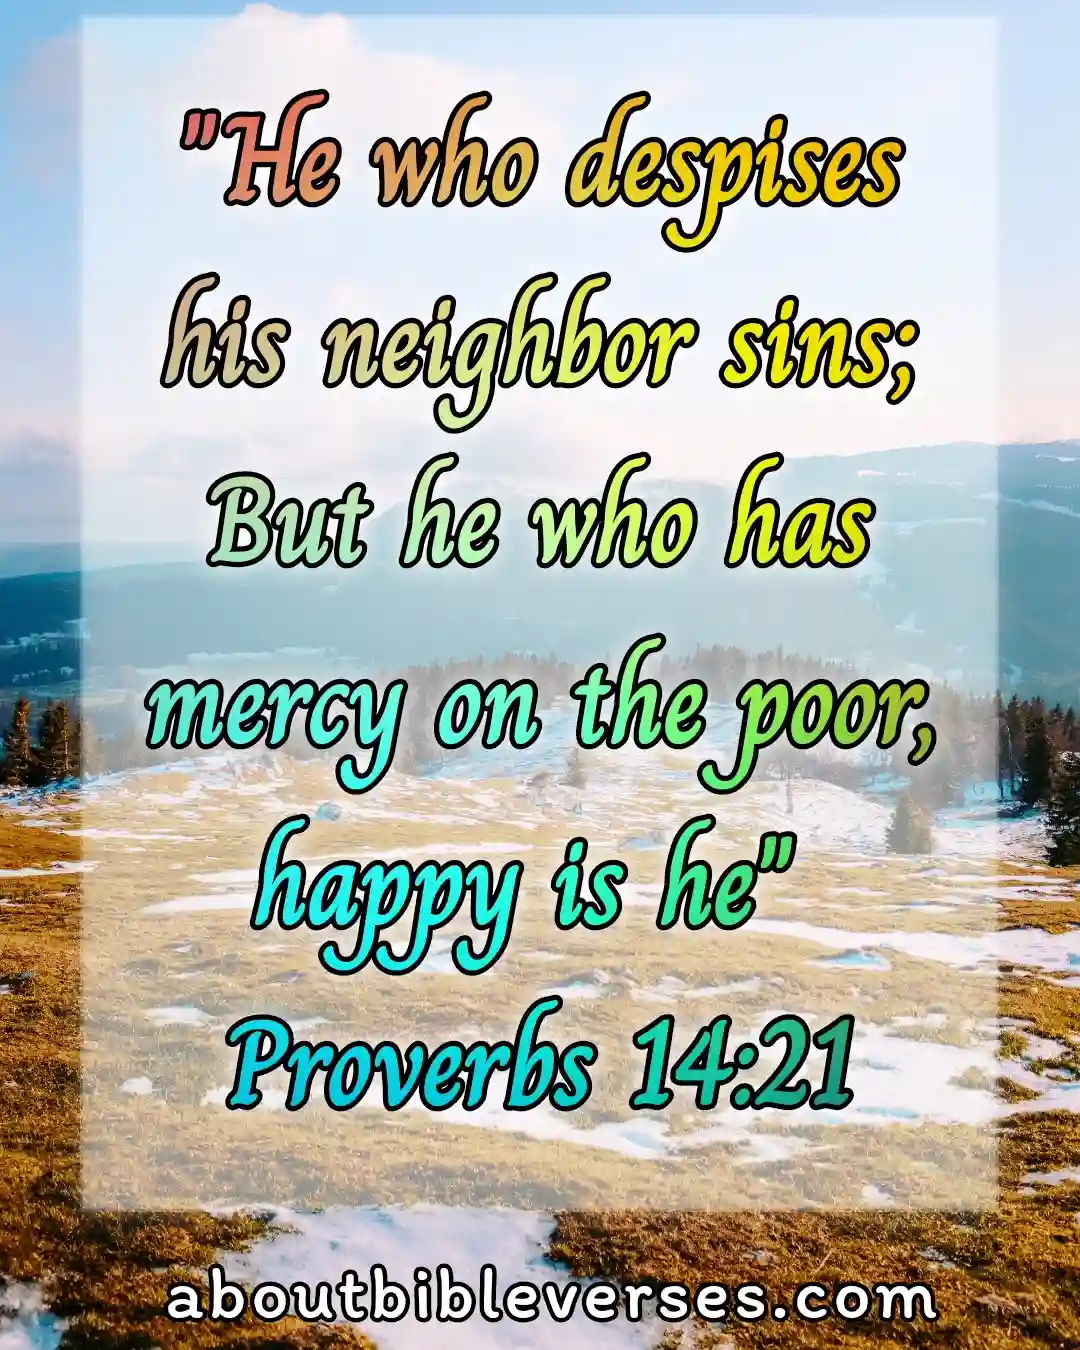 Bible Verse About Helping And Giving To The Poor (Proverbs 14:21)